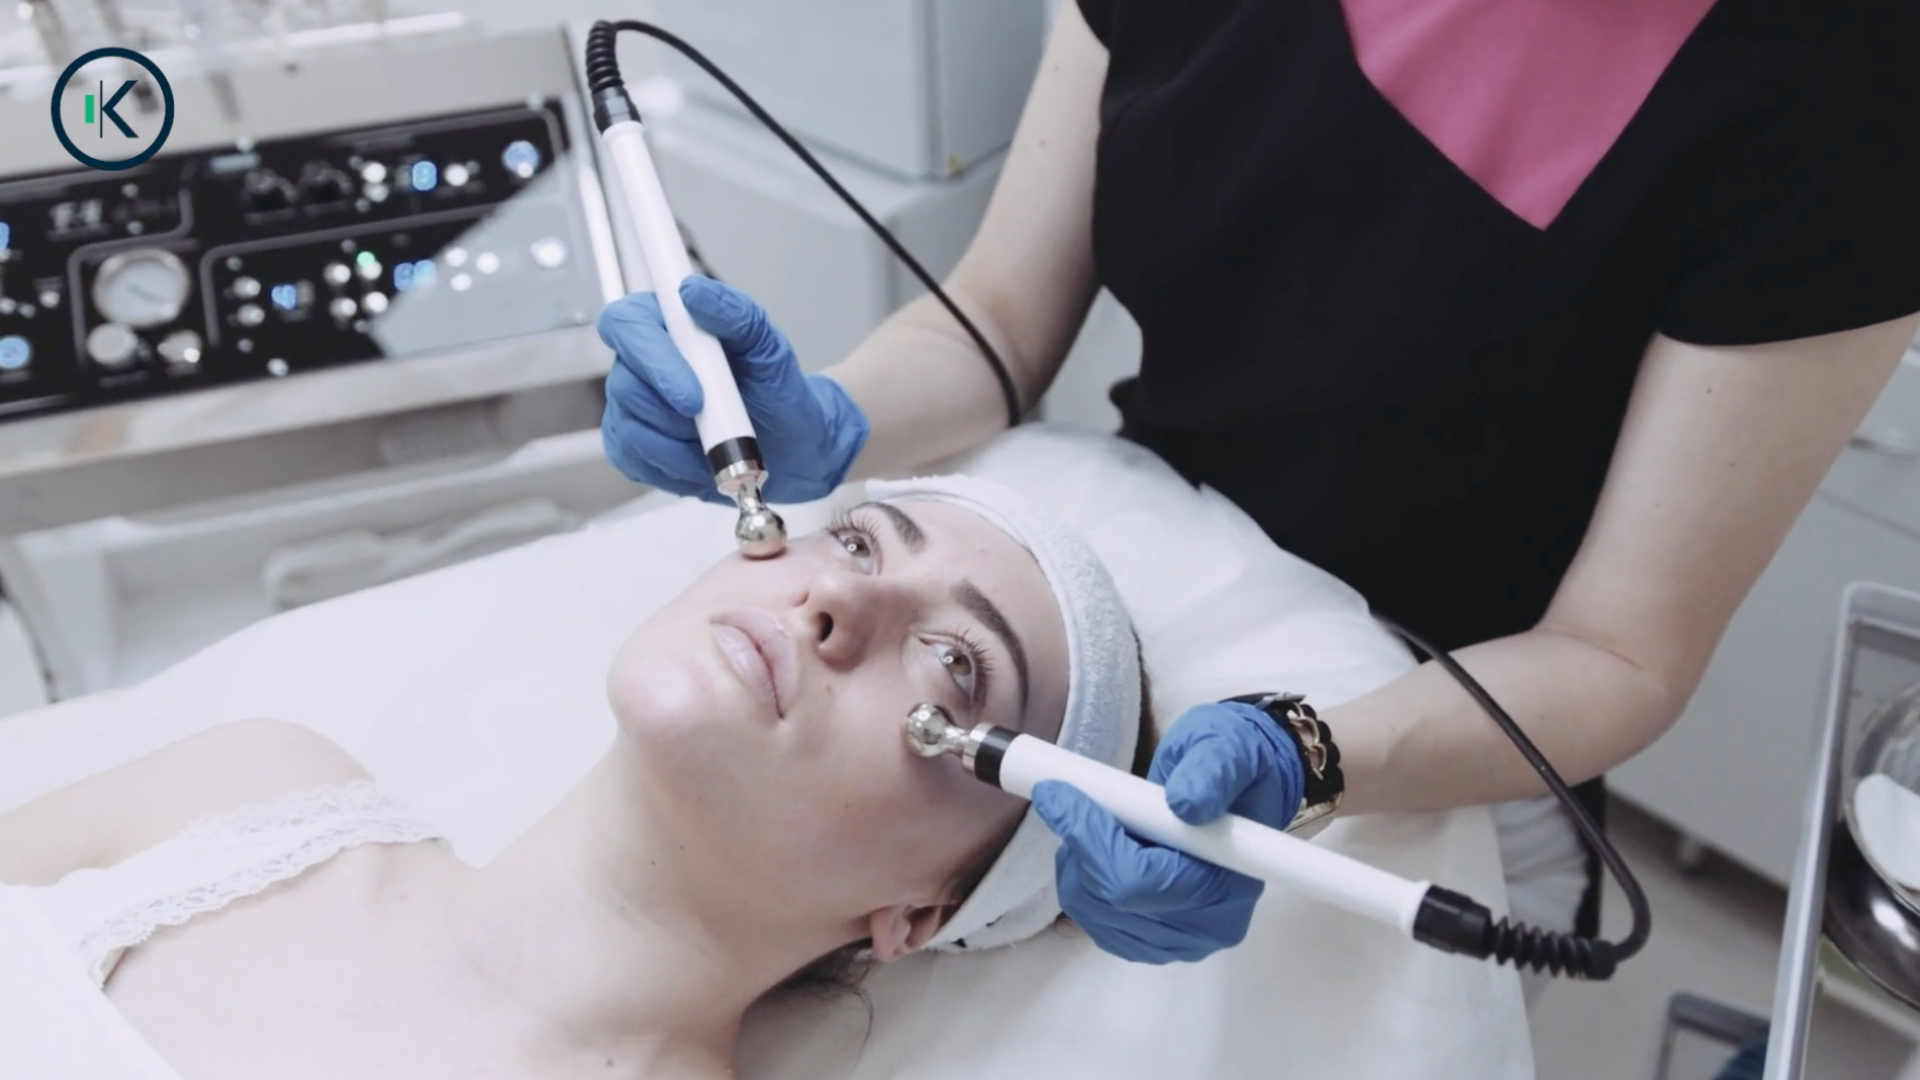 Aesthetics and Bioelectronics: A New Wave of Recovery